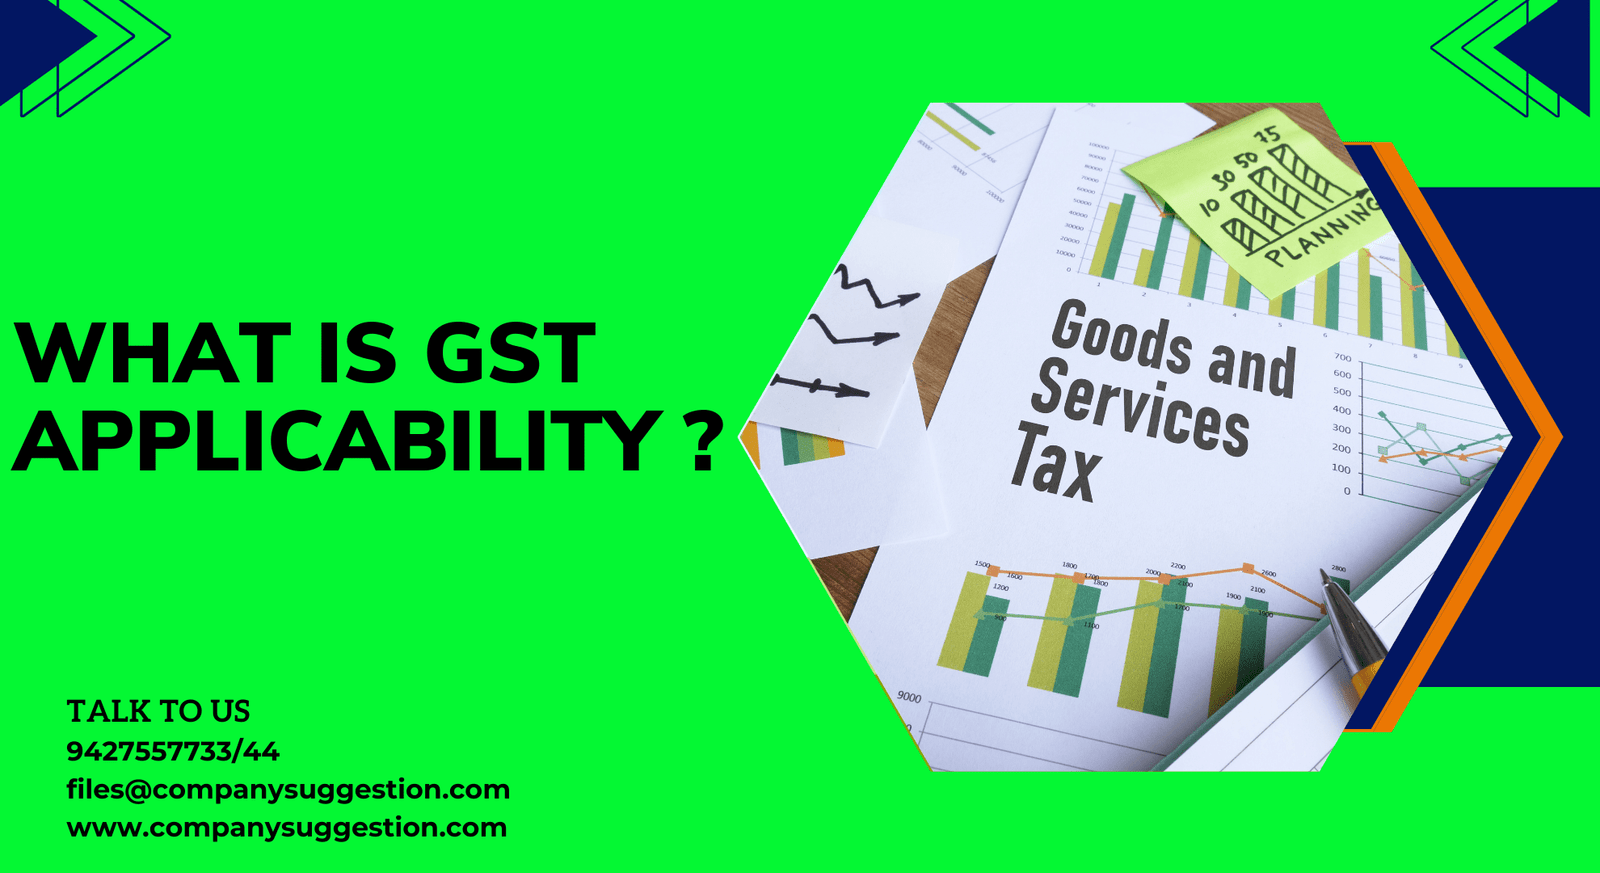 What is GST Applicability?